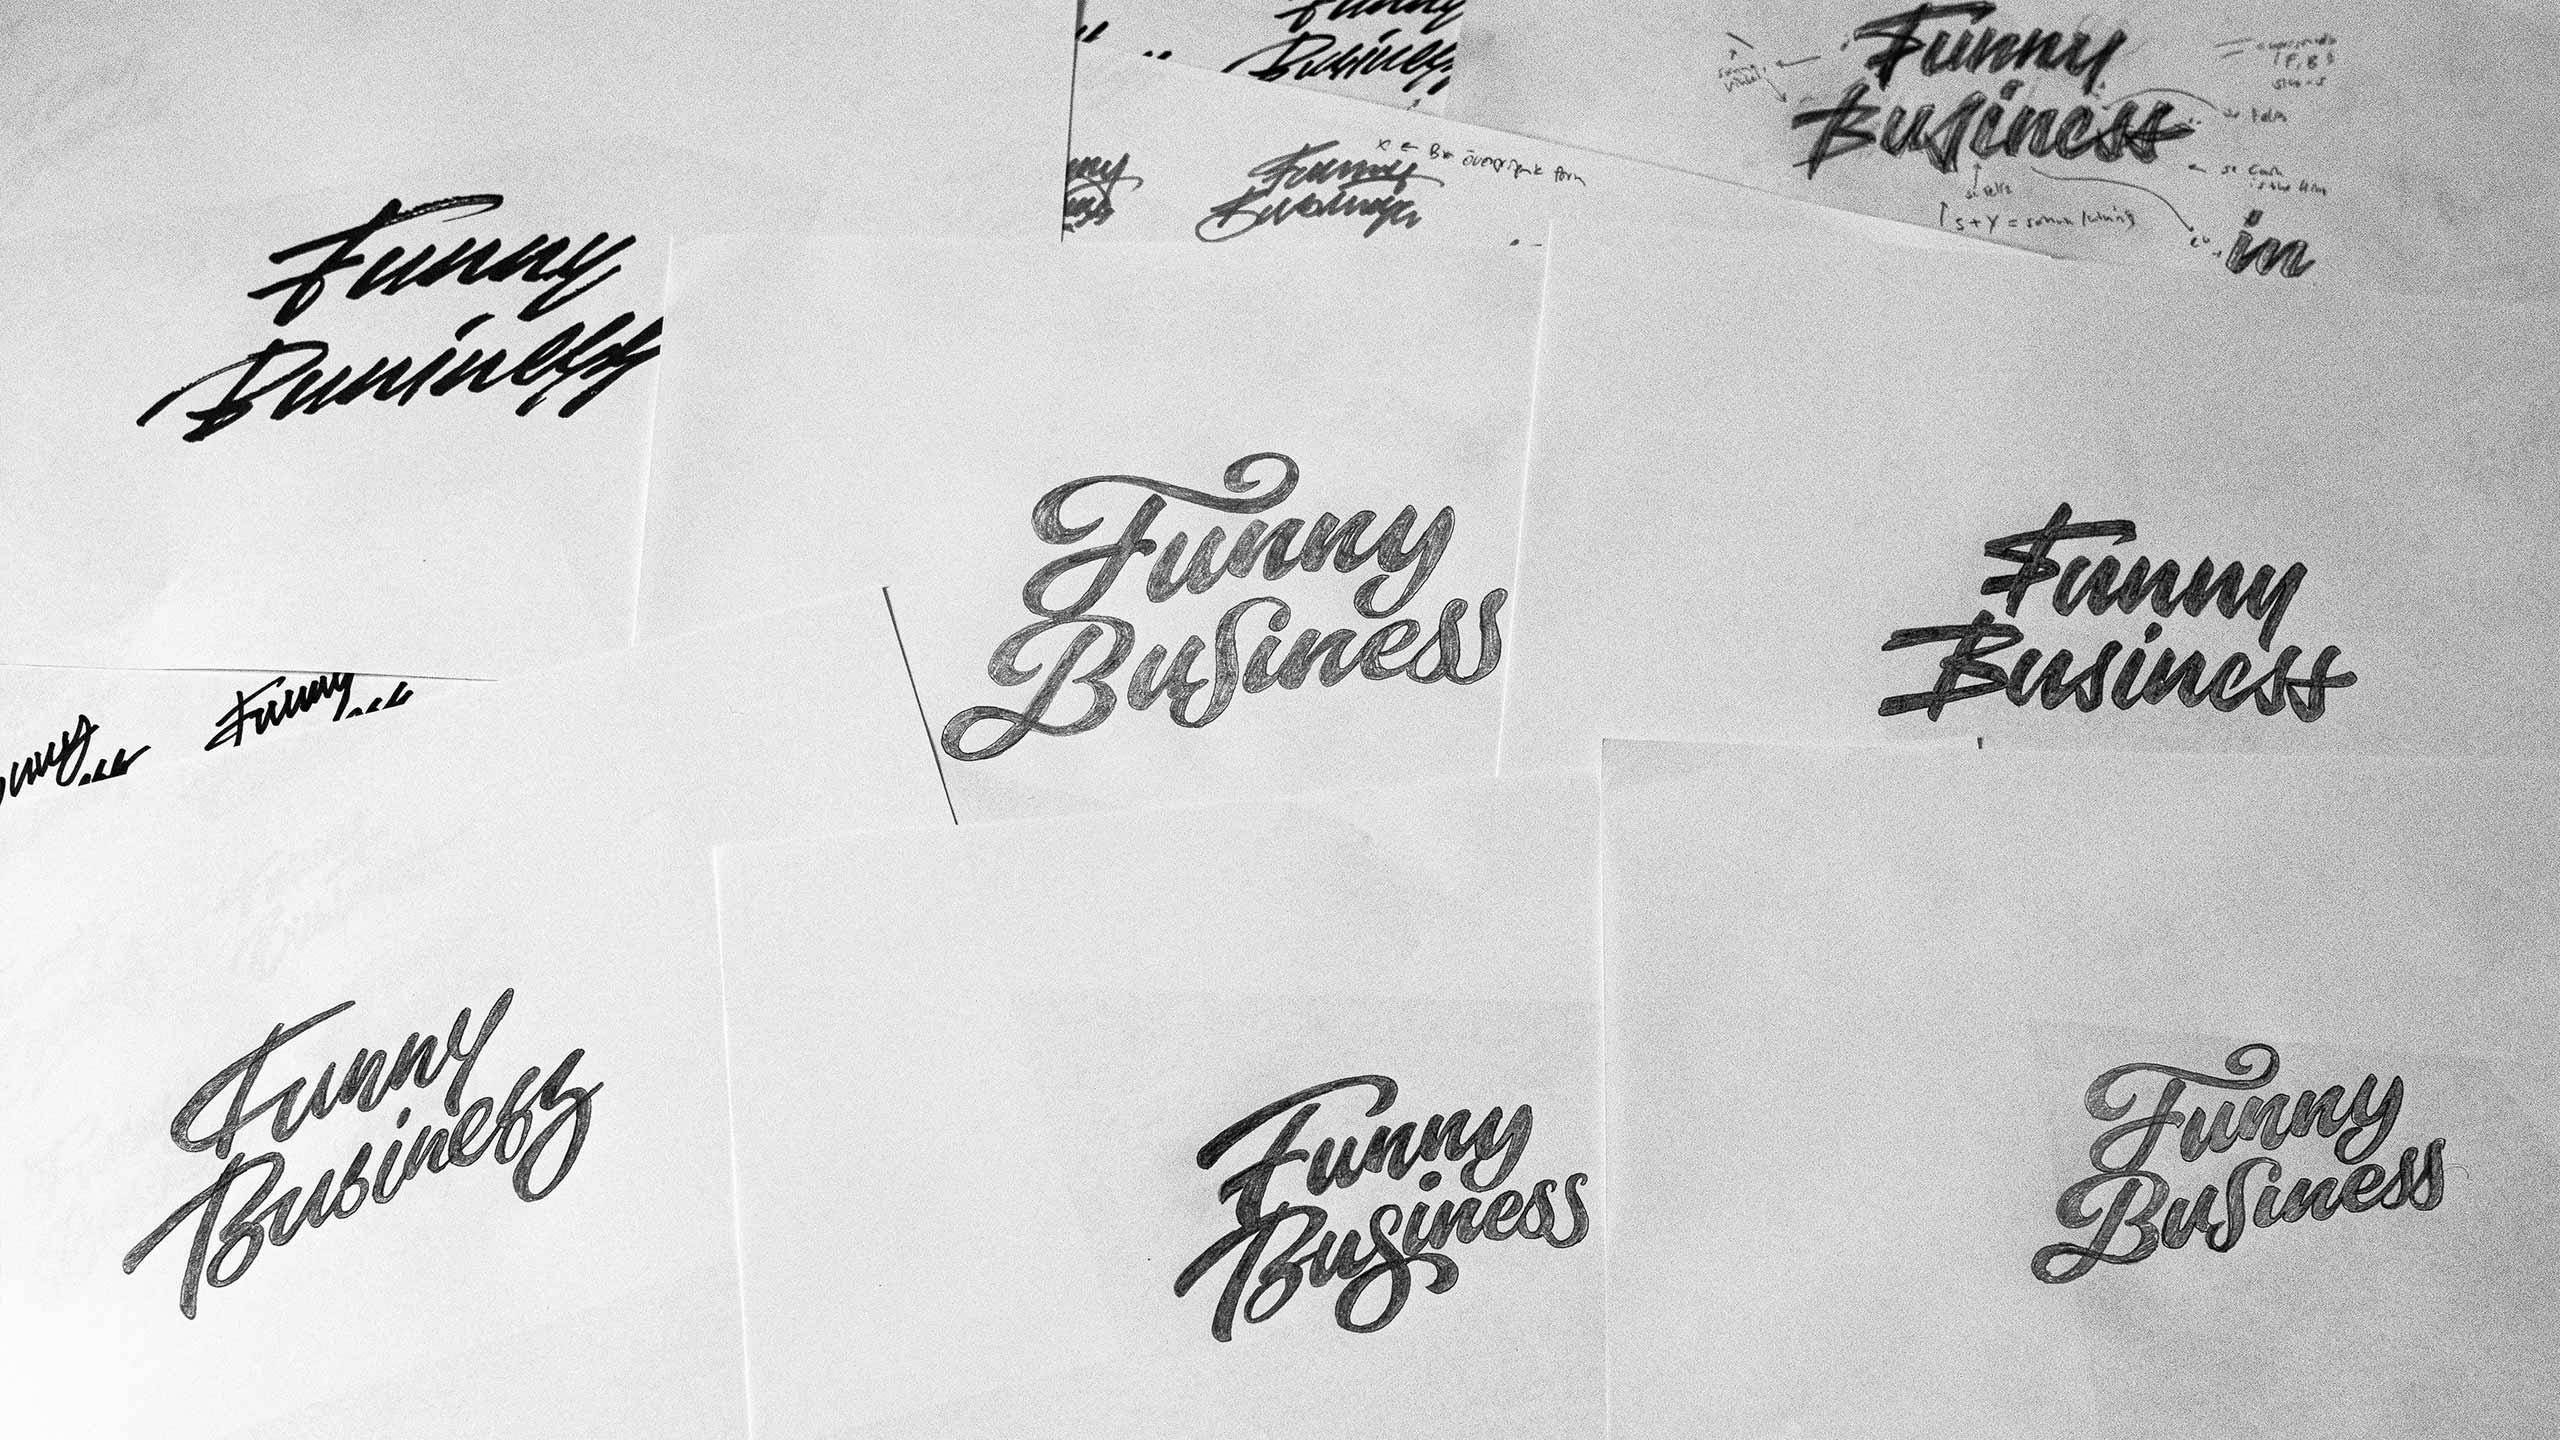 Funny Business logo sketches